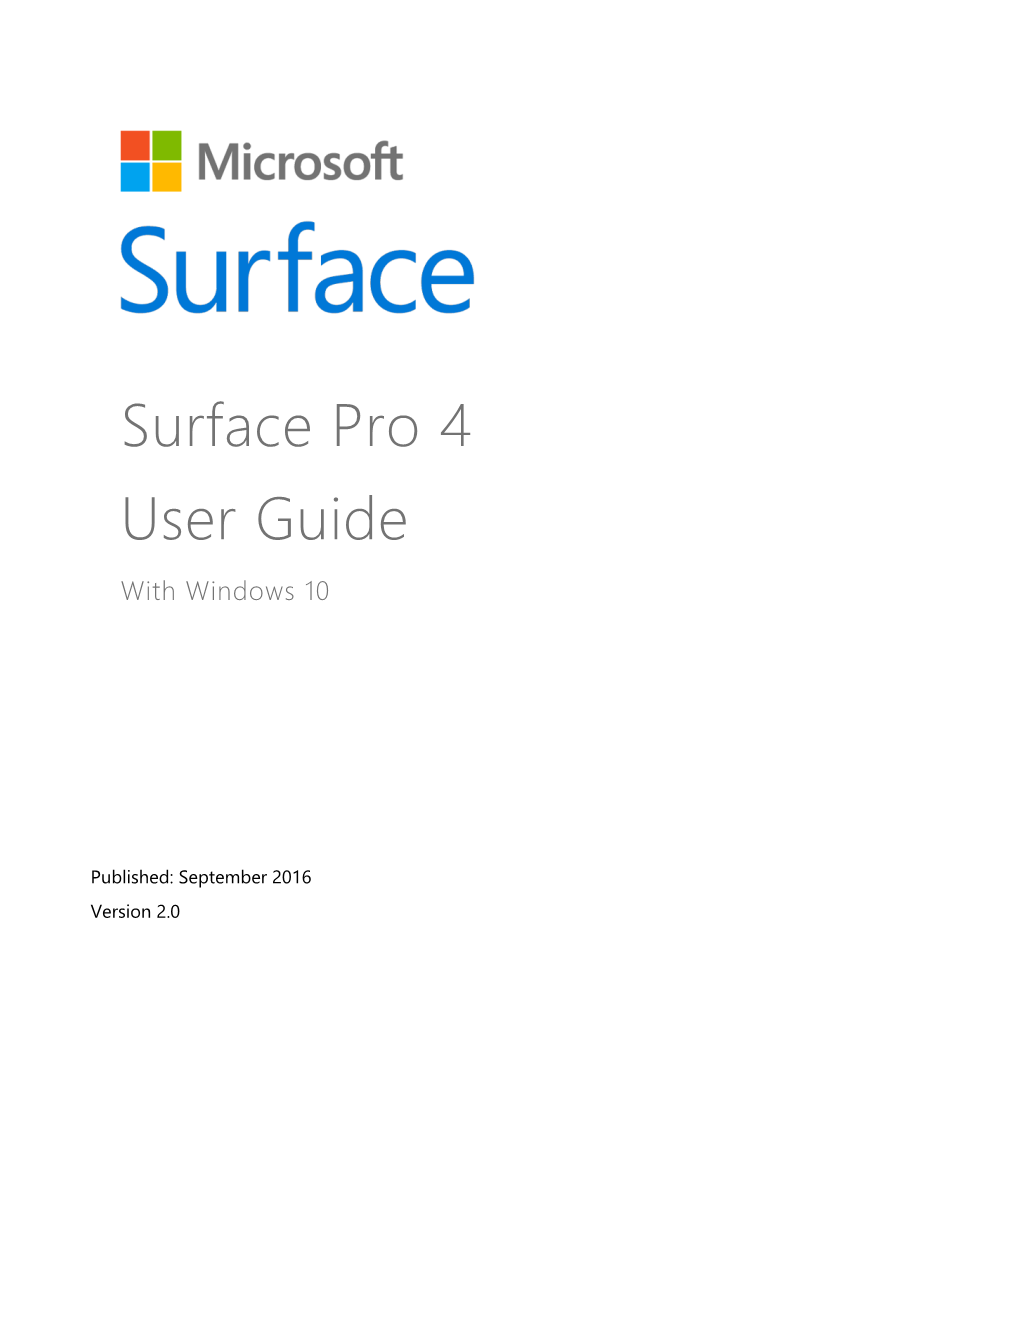 Surface Pro 4 User Guide